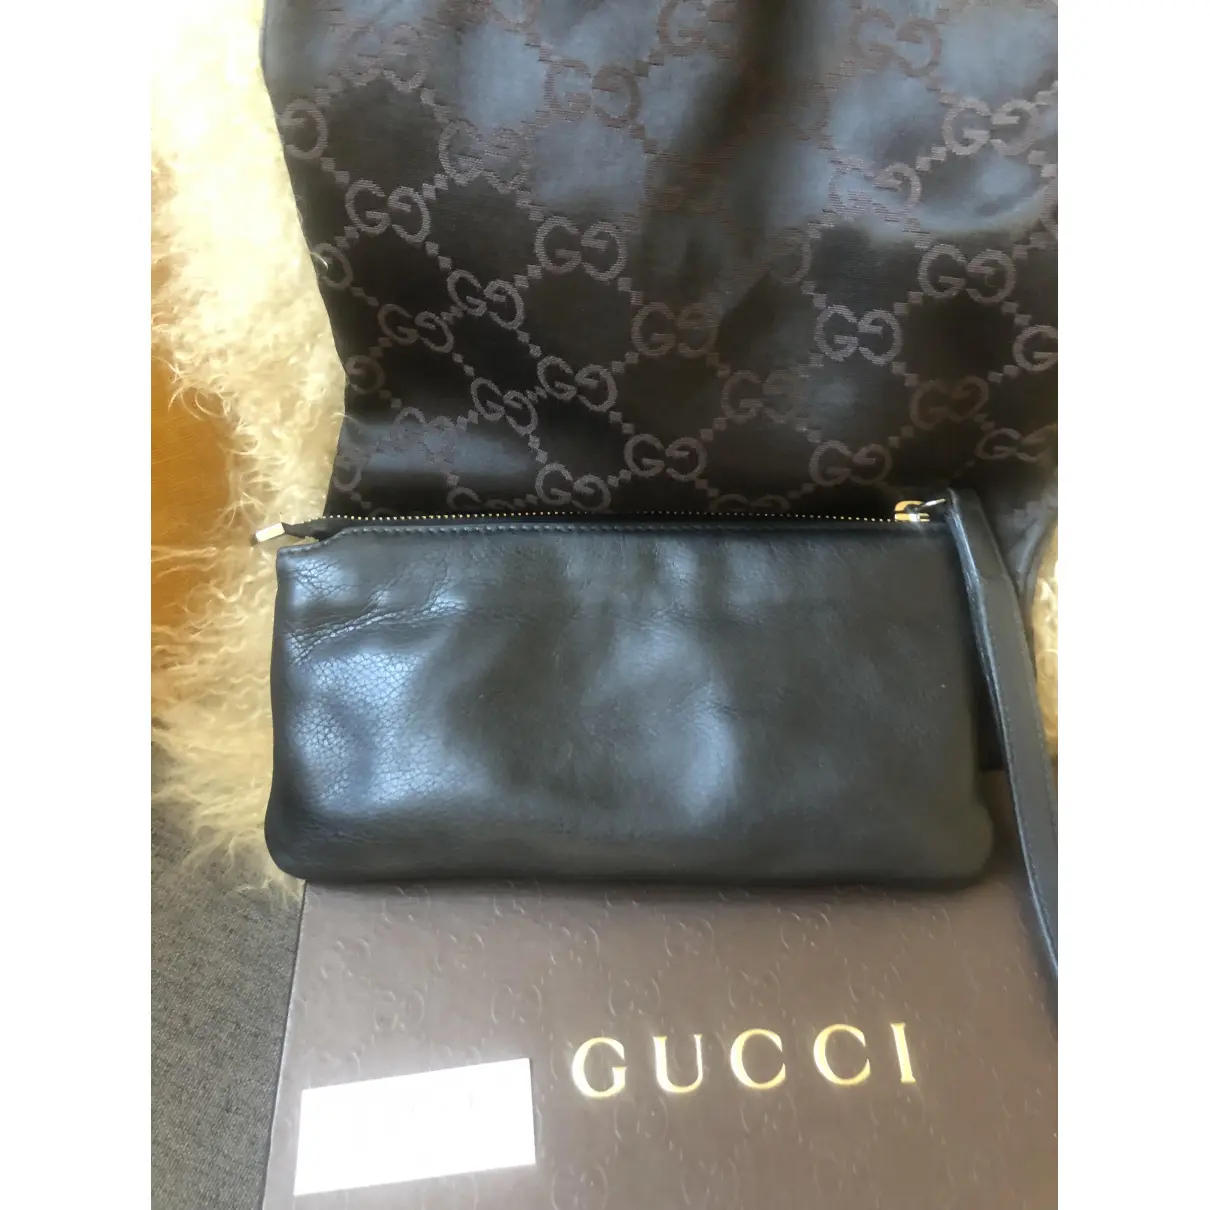 Buy Gucci Soho leather clutch bag online